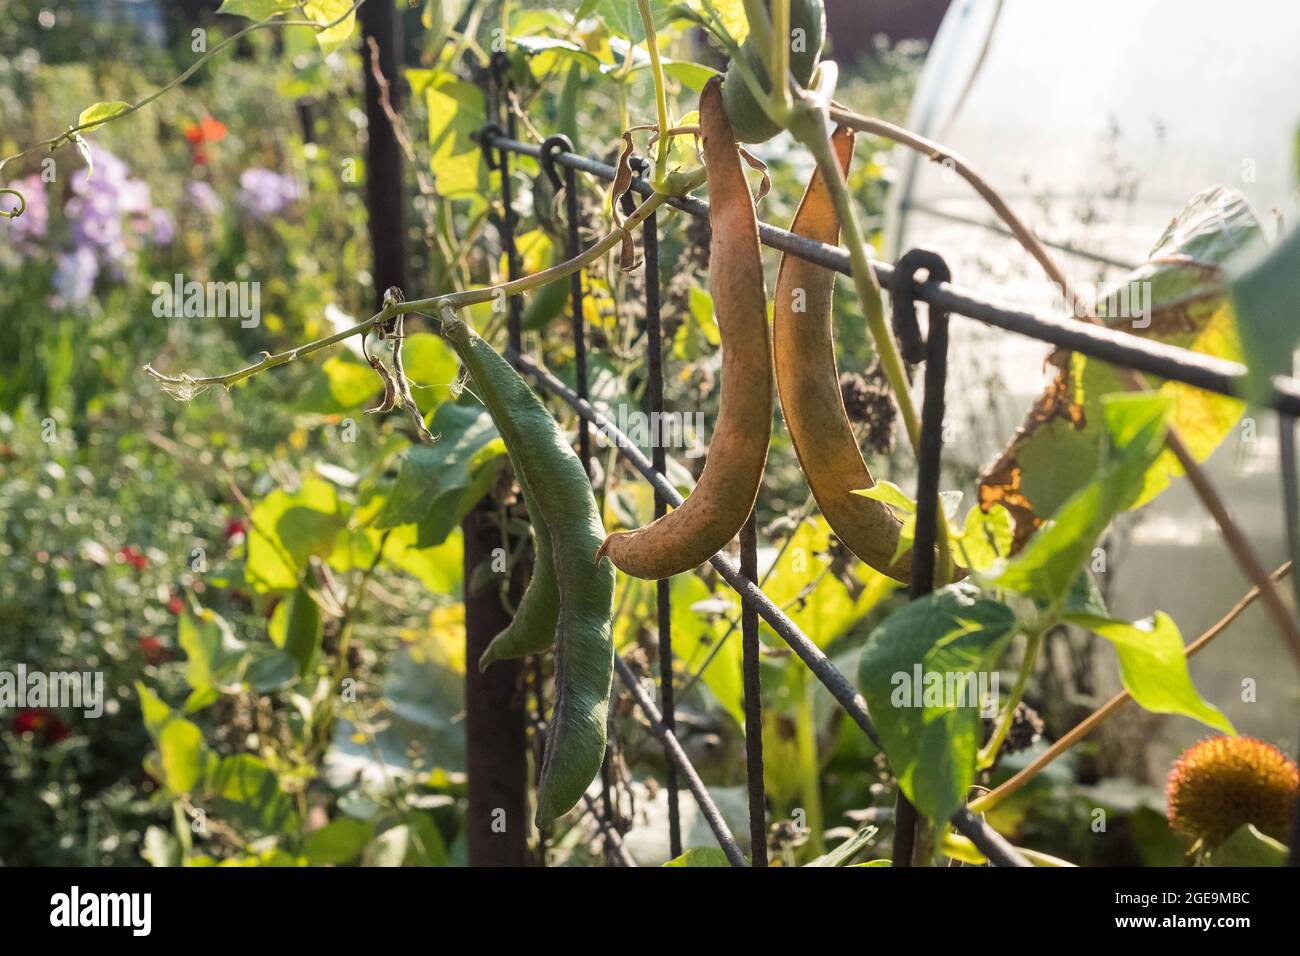 Pea pods grow in the vegetable garden. Autumn plants. Blurred background. Stock Photo